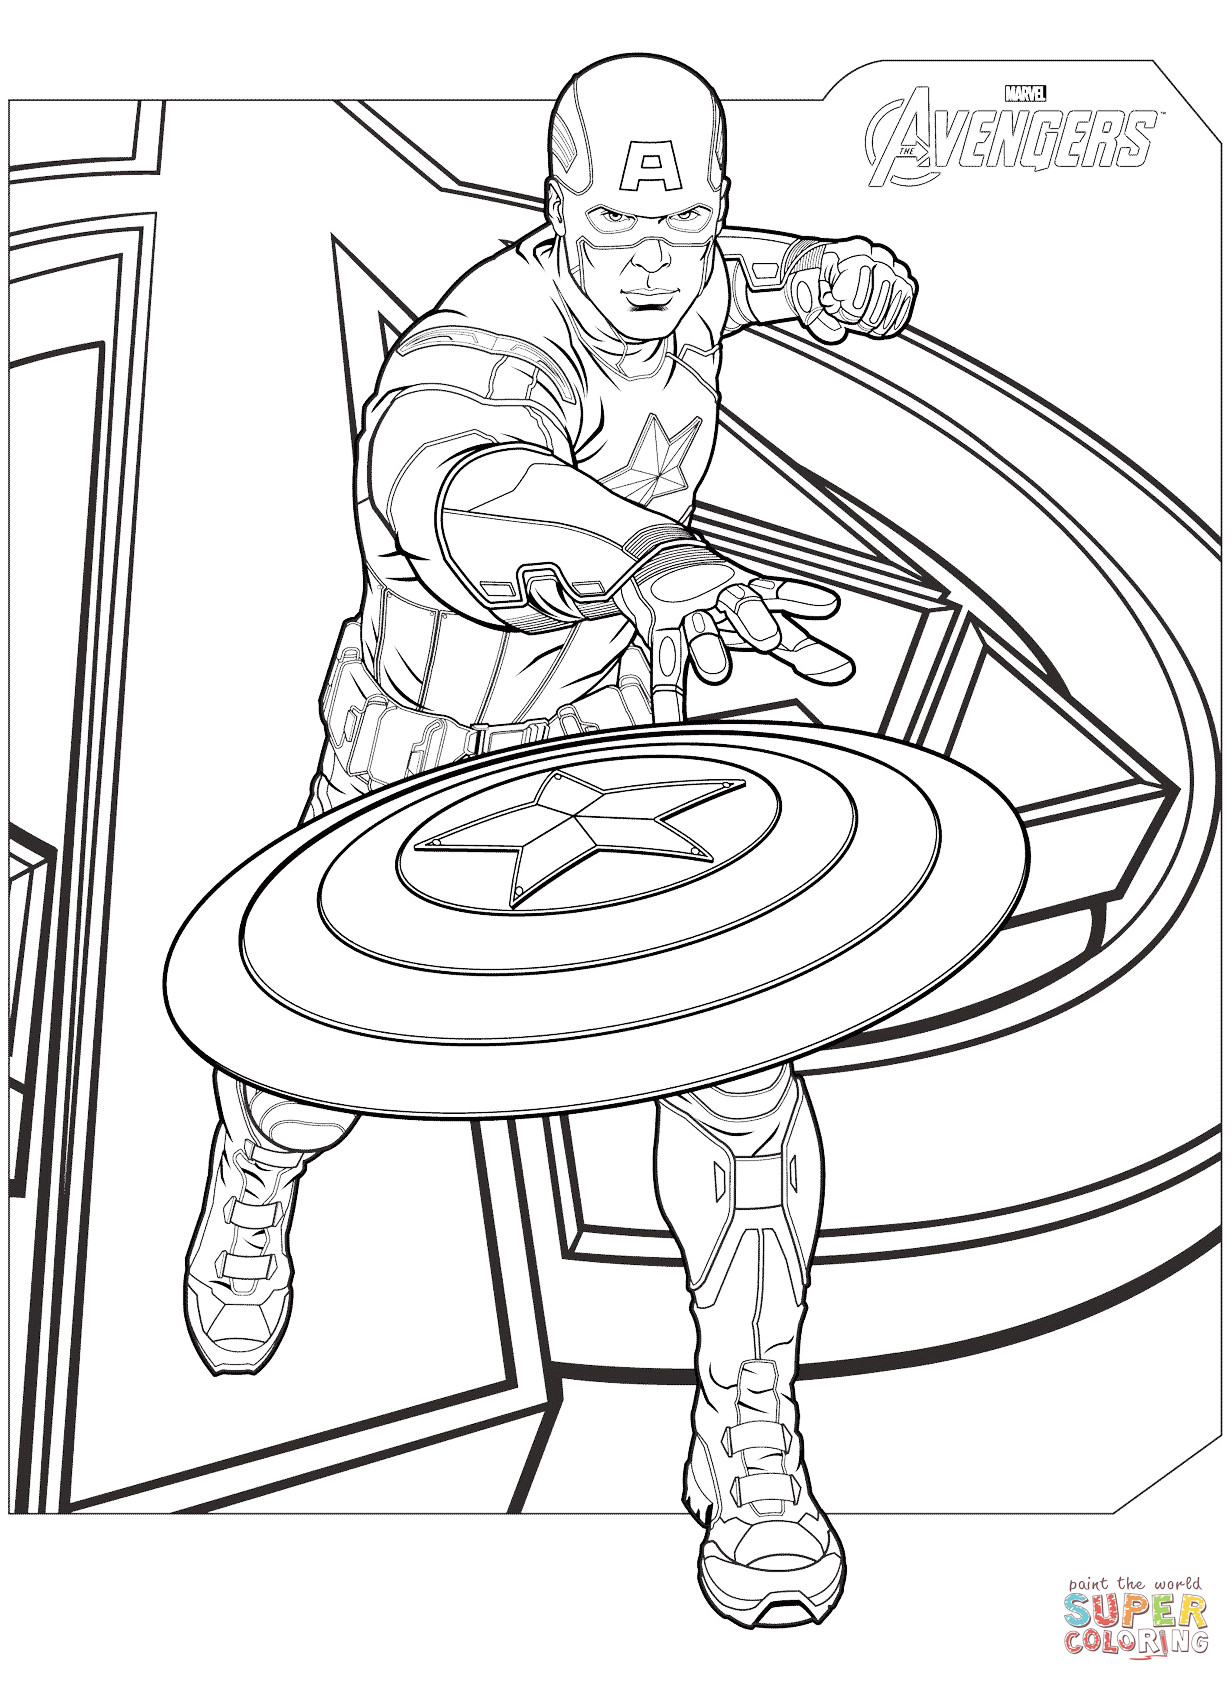 Coloring Pages Avengers
 Avengers Captain America coloring page